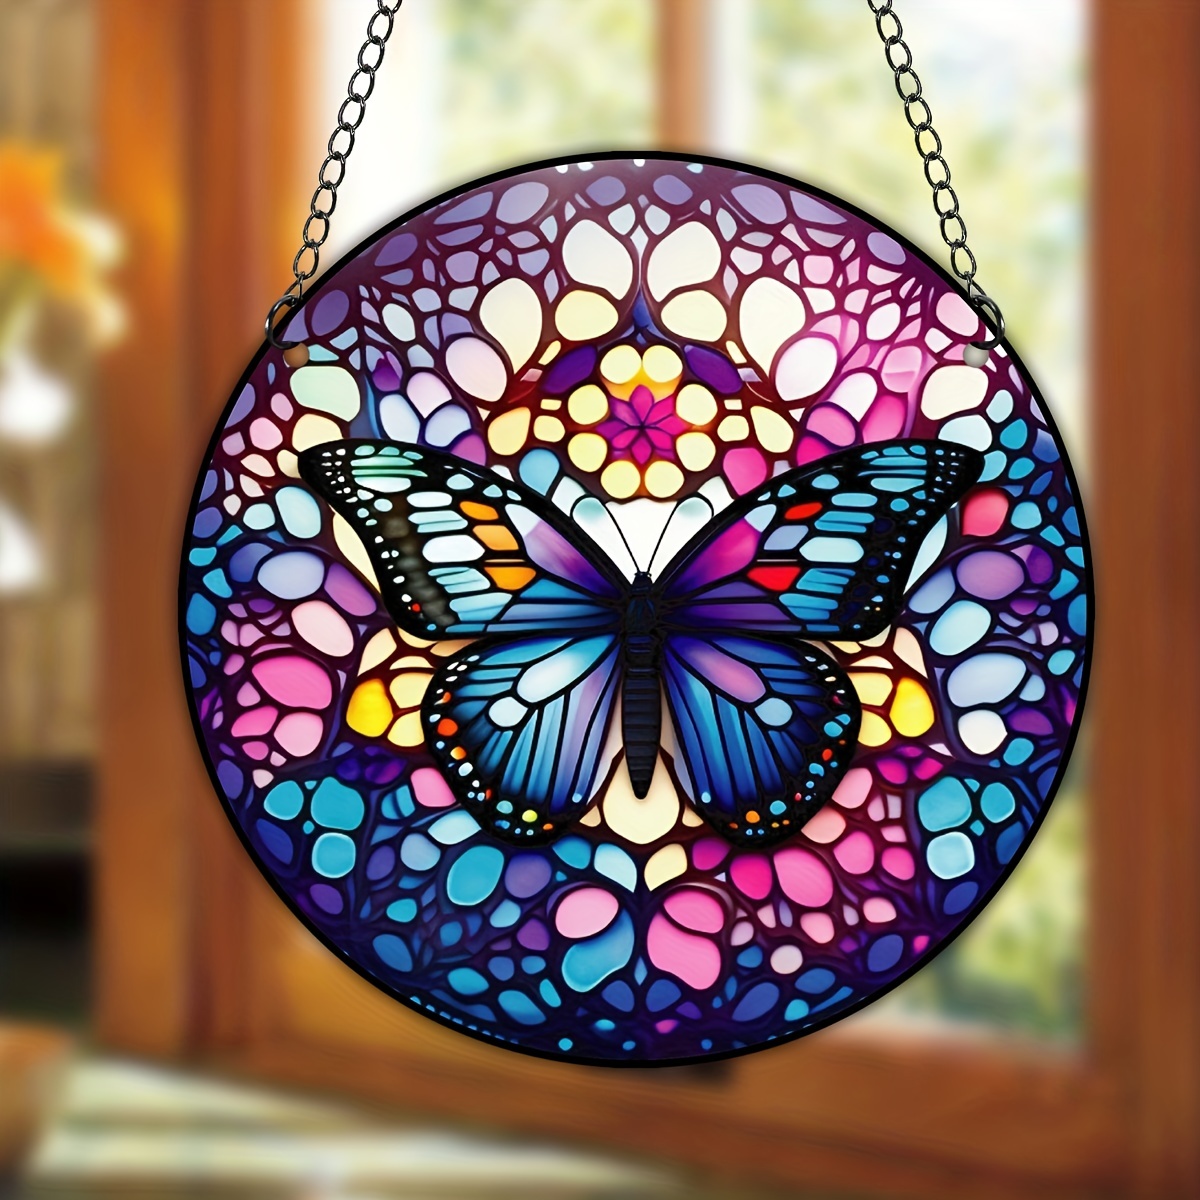 3D Metal Monarch Butterfly Wall Art, Stained Glass Hanging Butterfly Window  Craft Decorations 